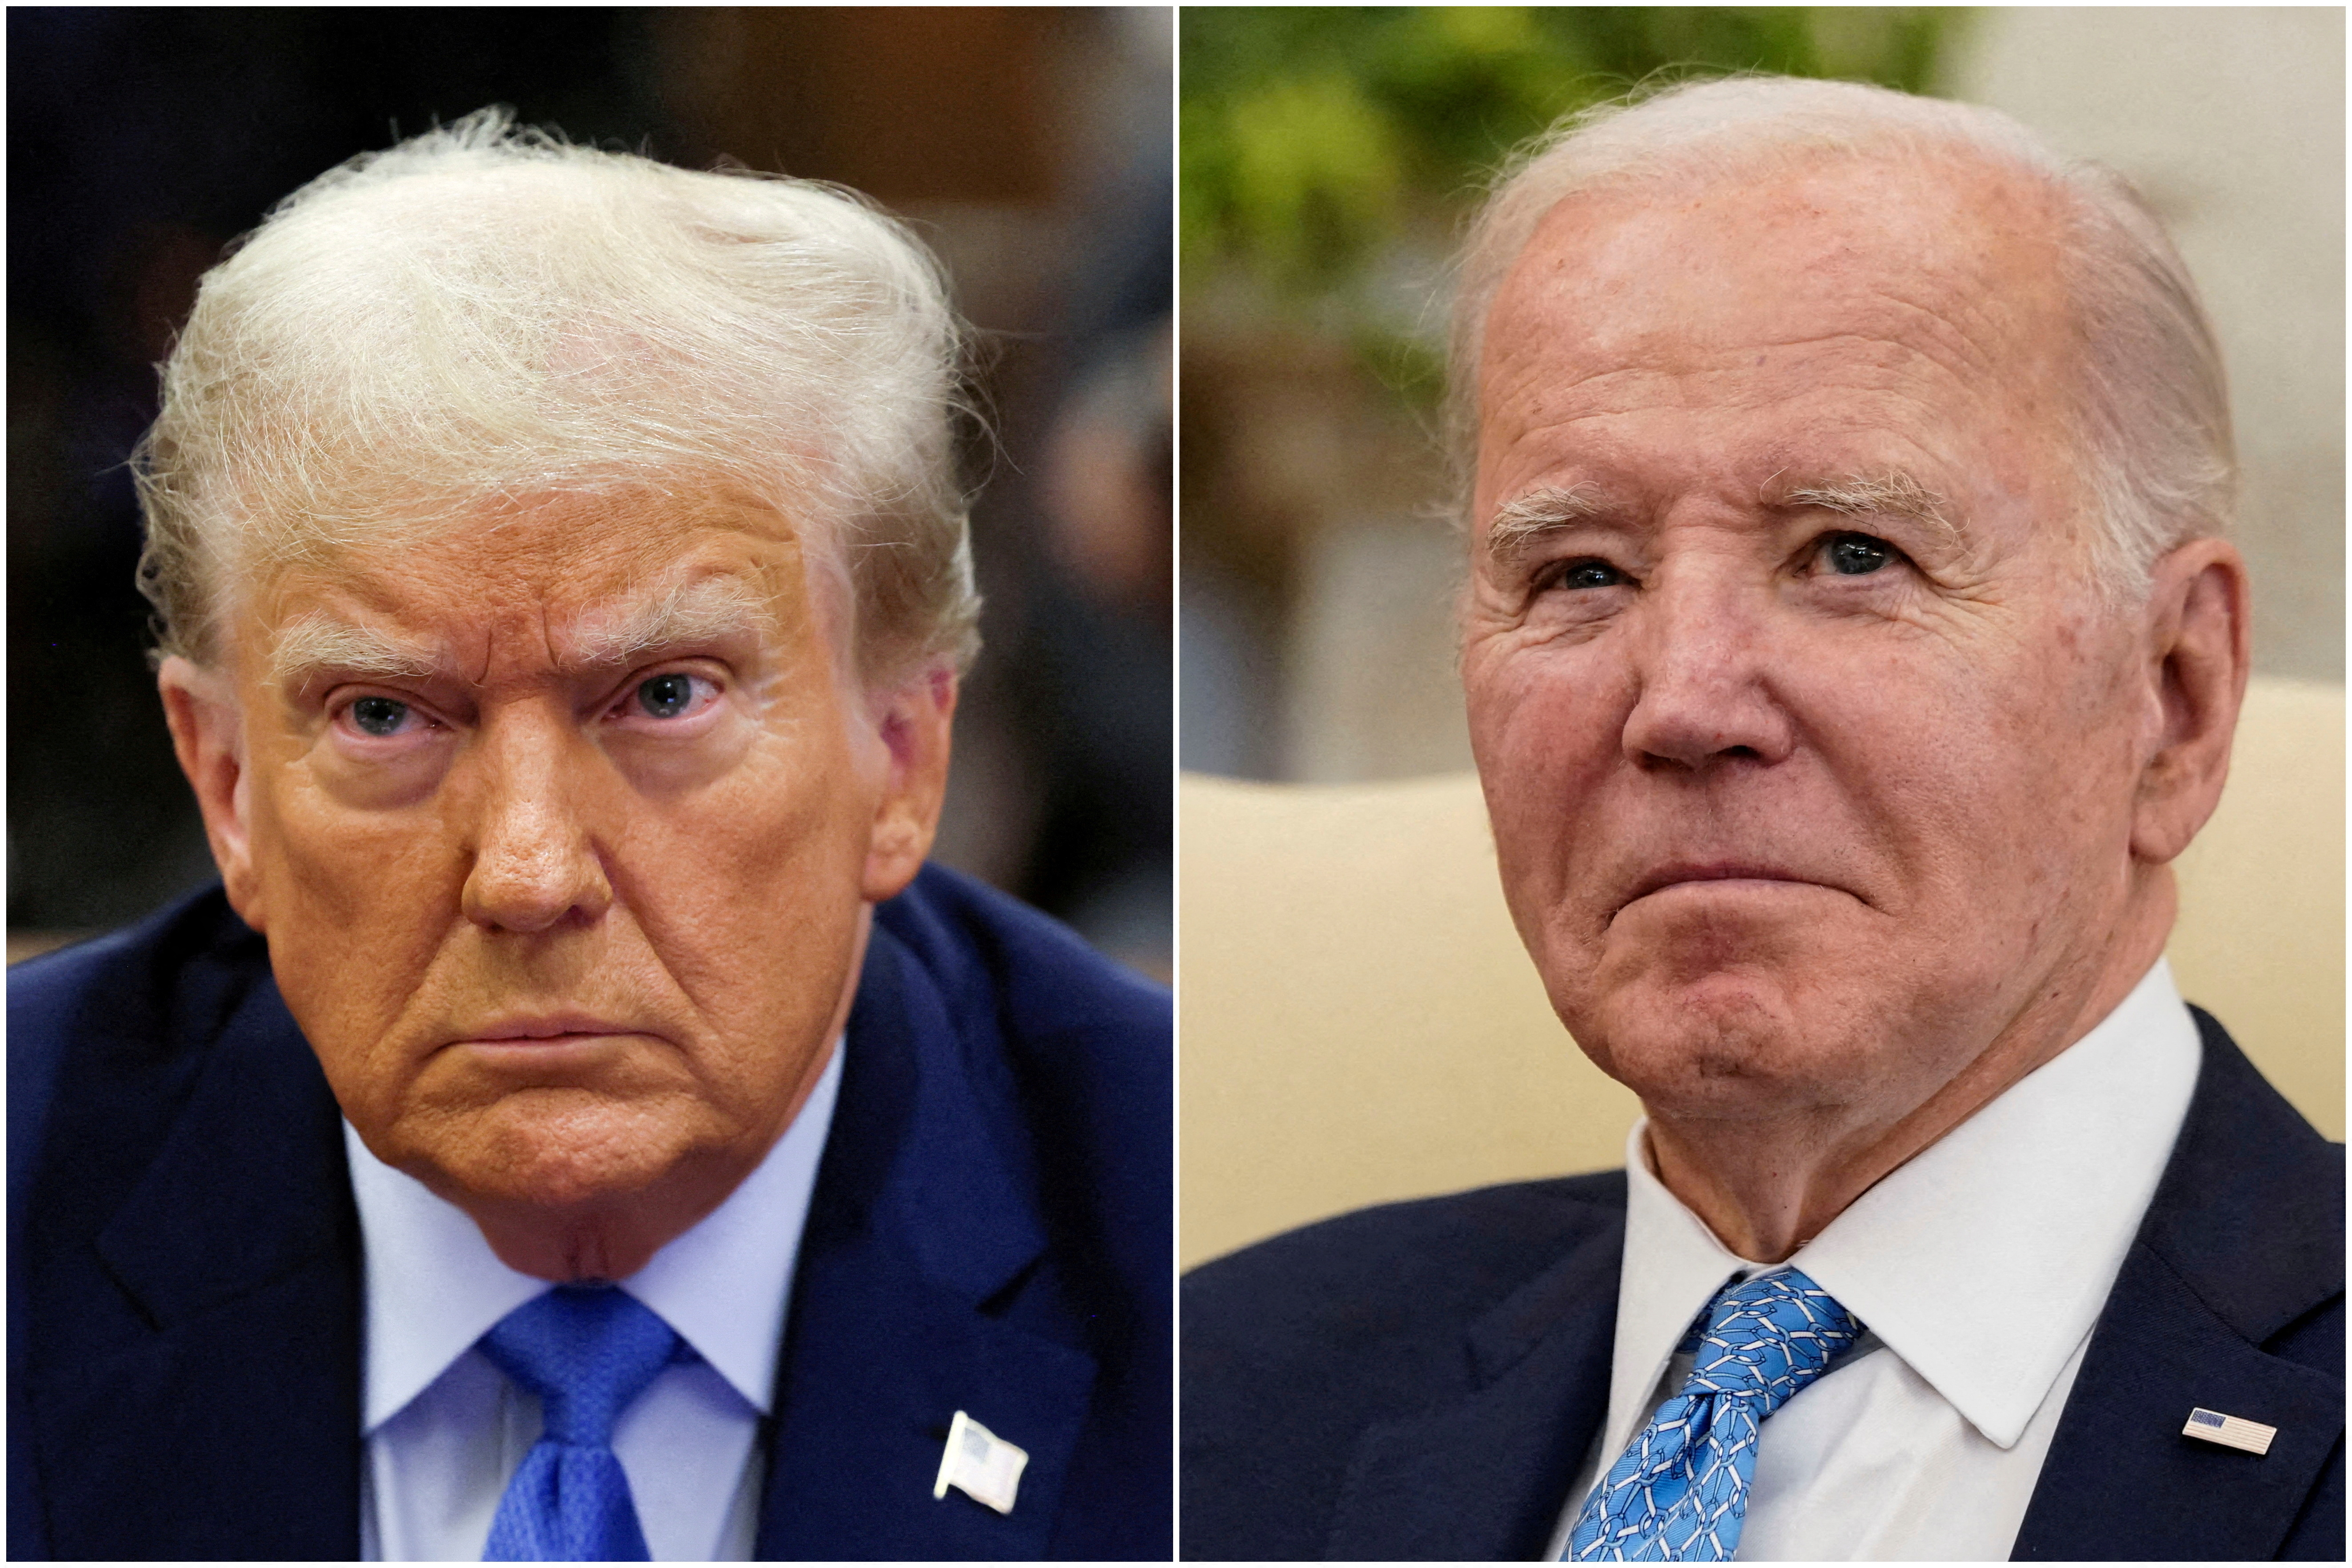 Trump has an edge over Biden on economy, Reuters/Ipsos poll finds | Reuters